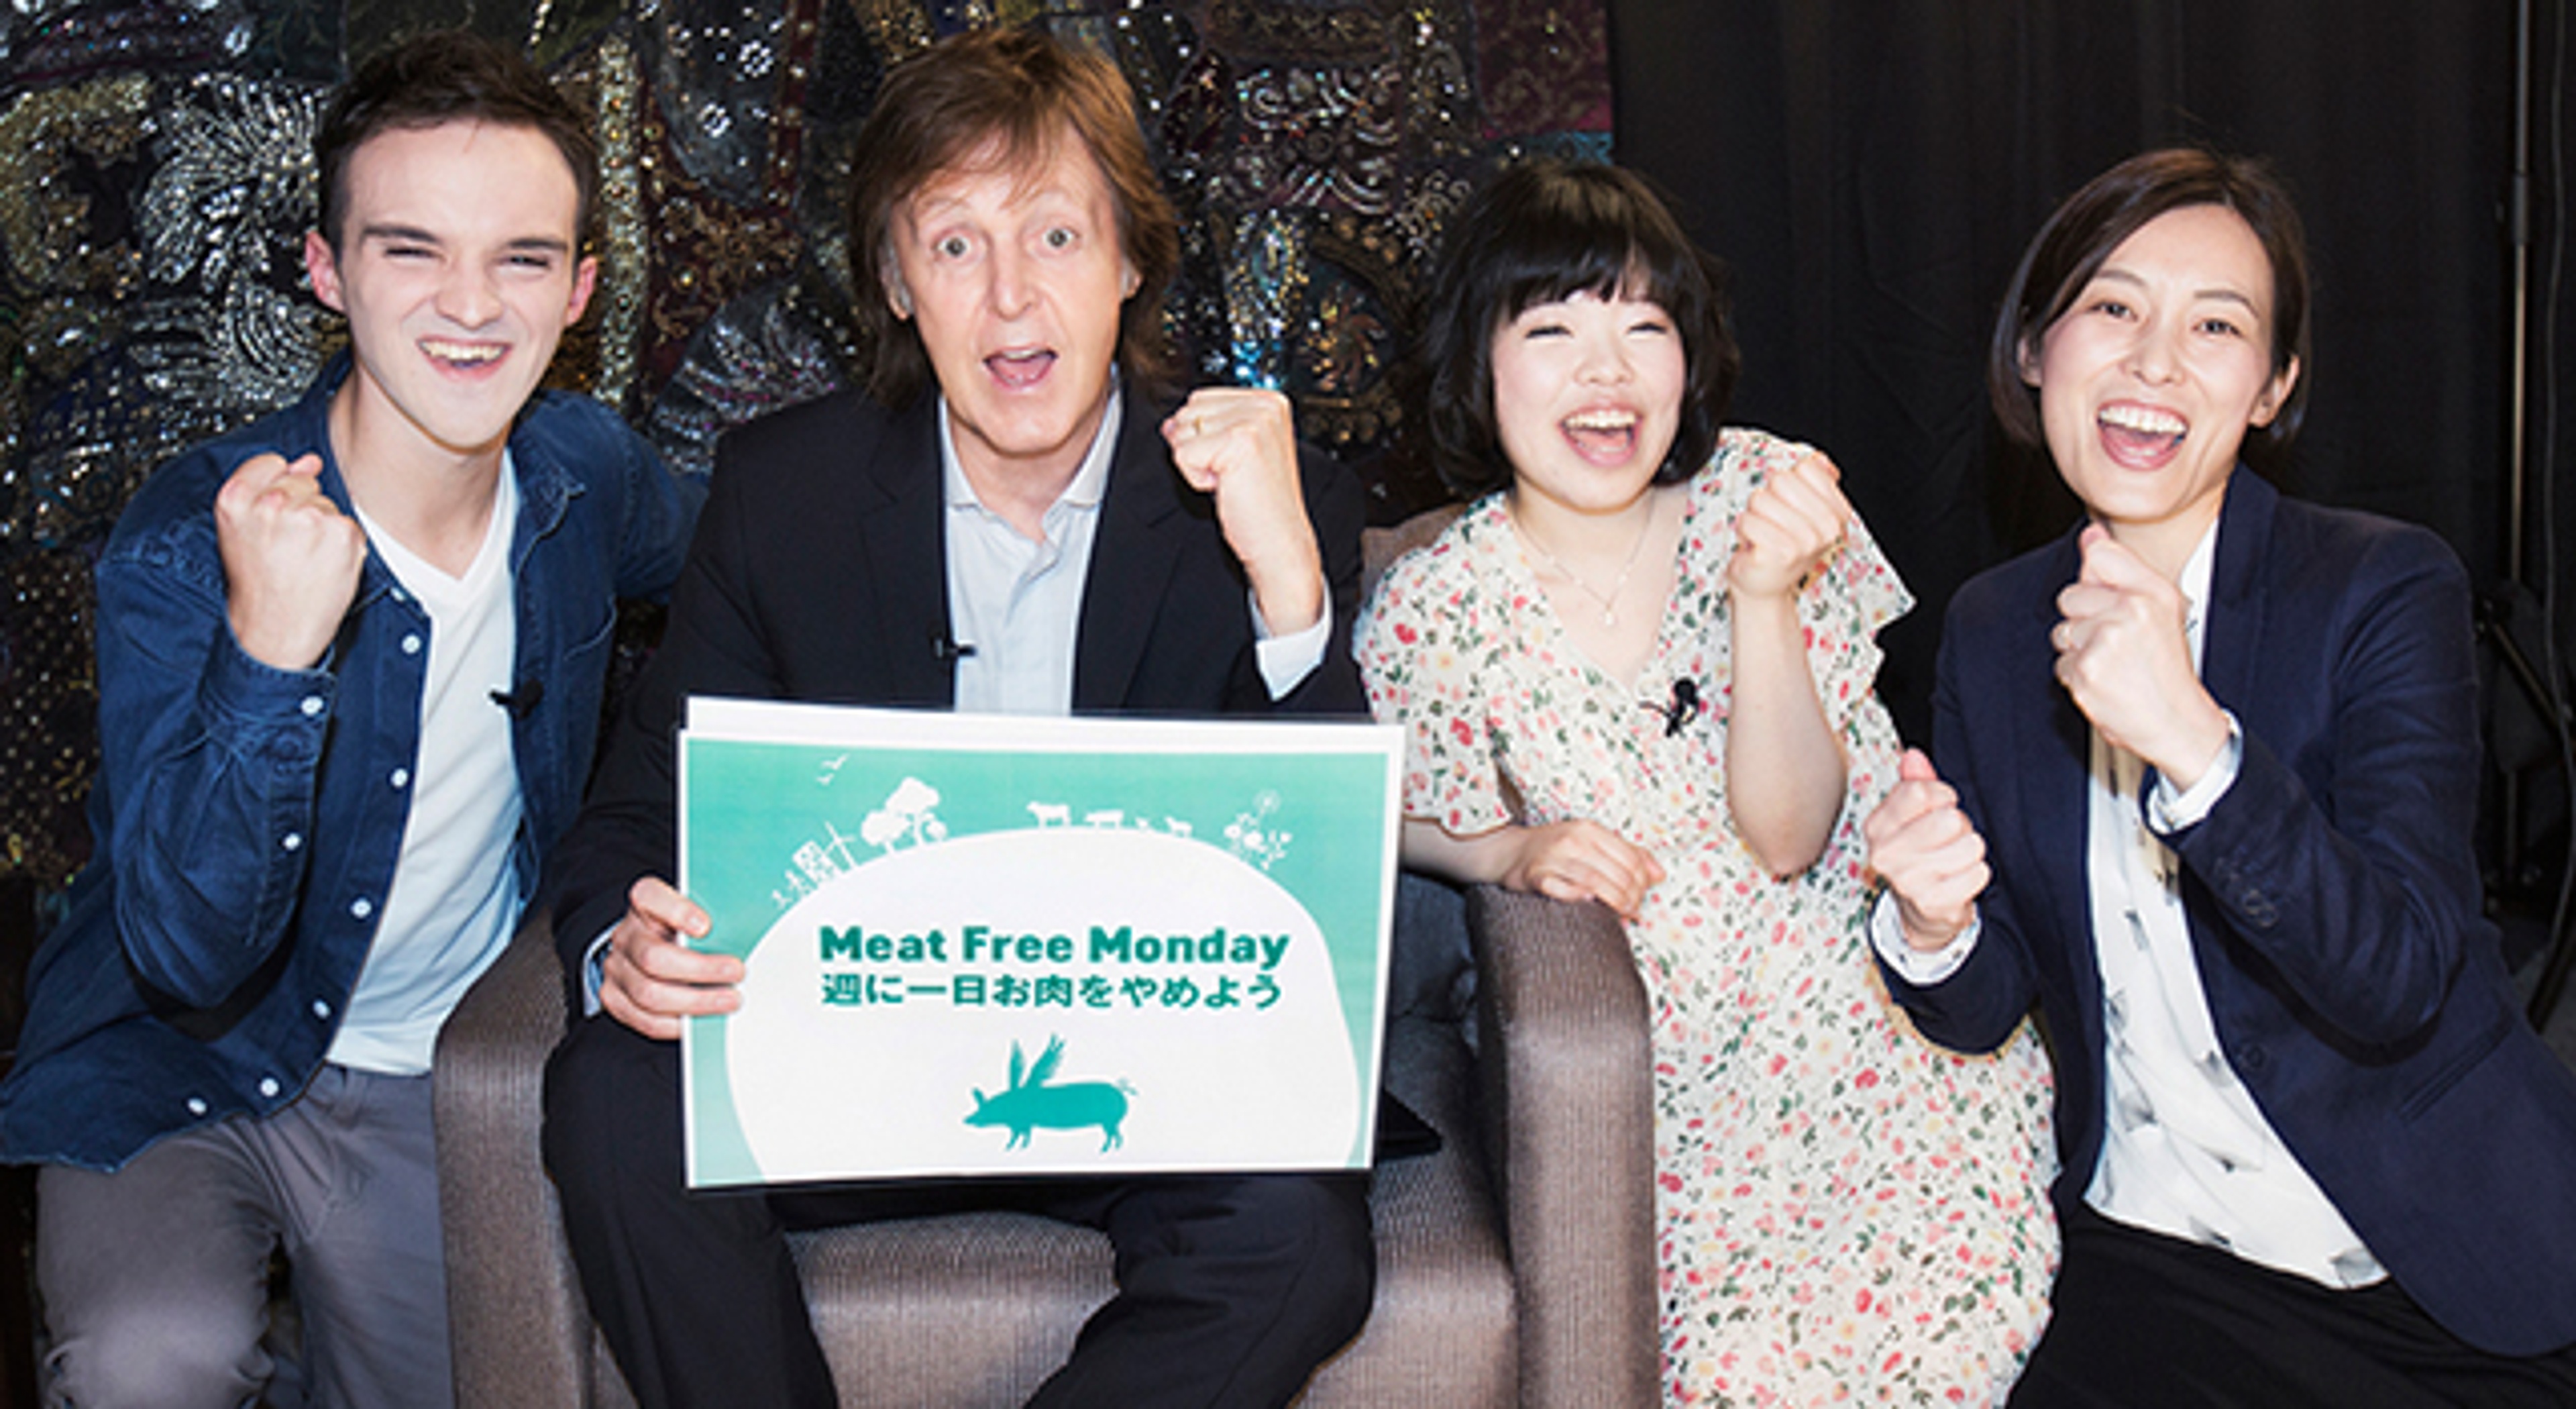 New Video: Meat Free Monday Launches in Japan